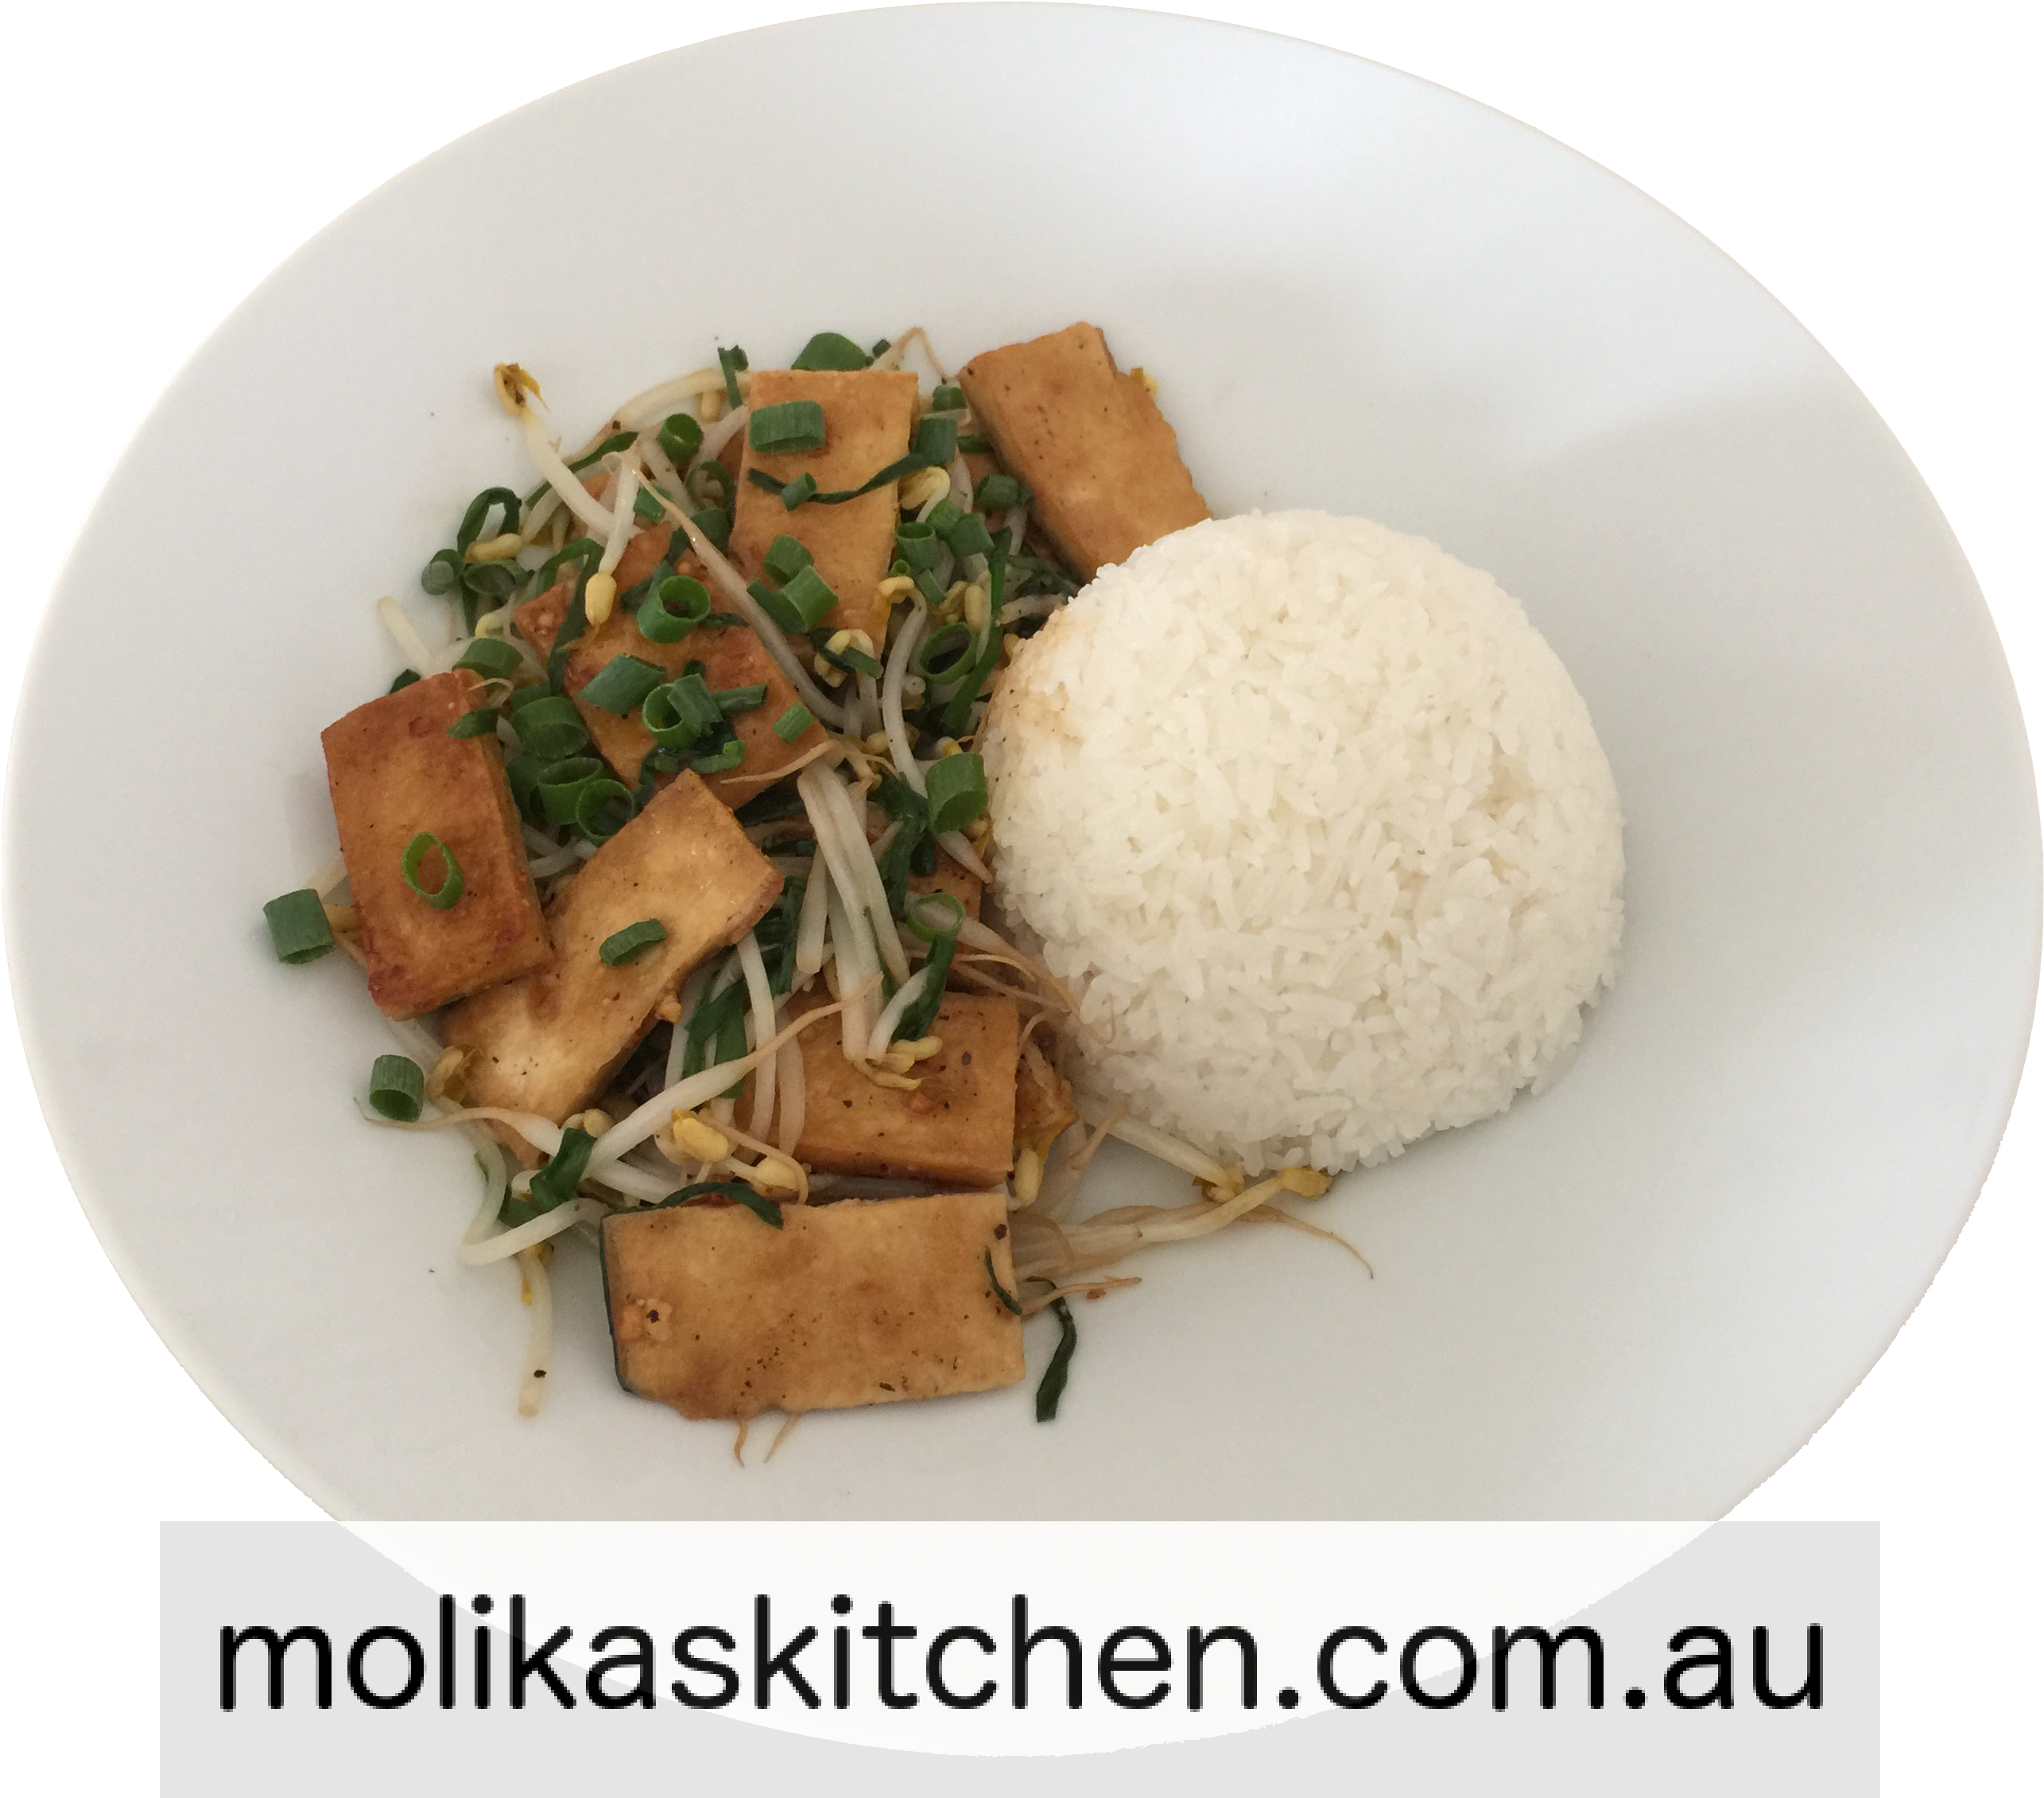 A Plate Of Food With Rice And Tofu